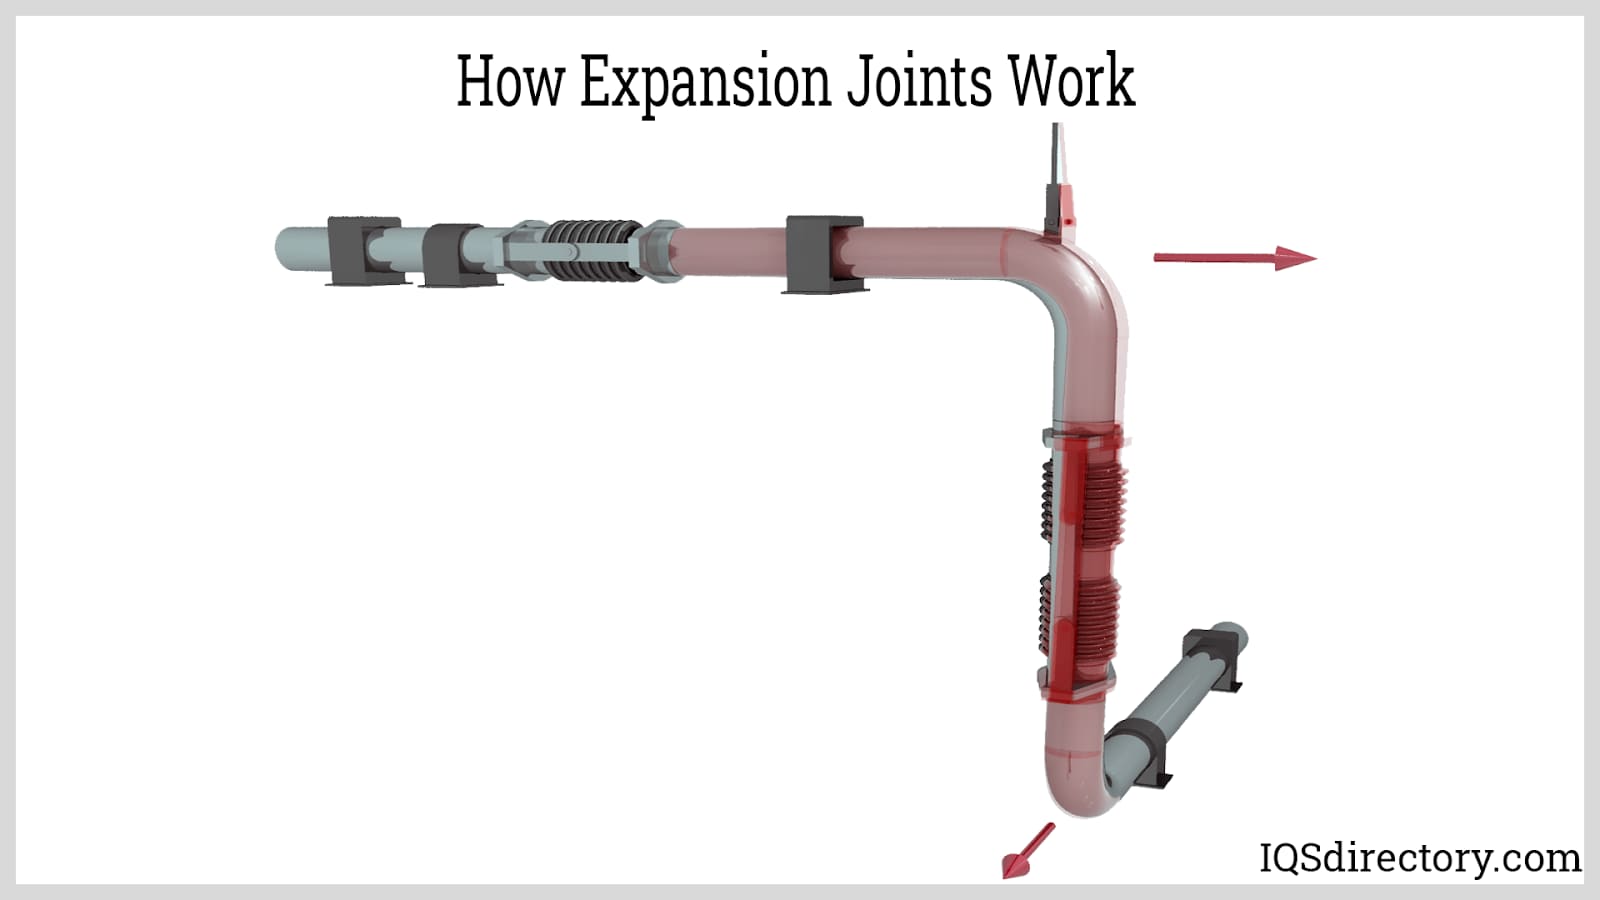 How Expansion Joints Work